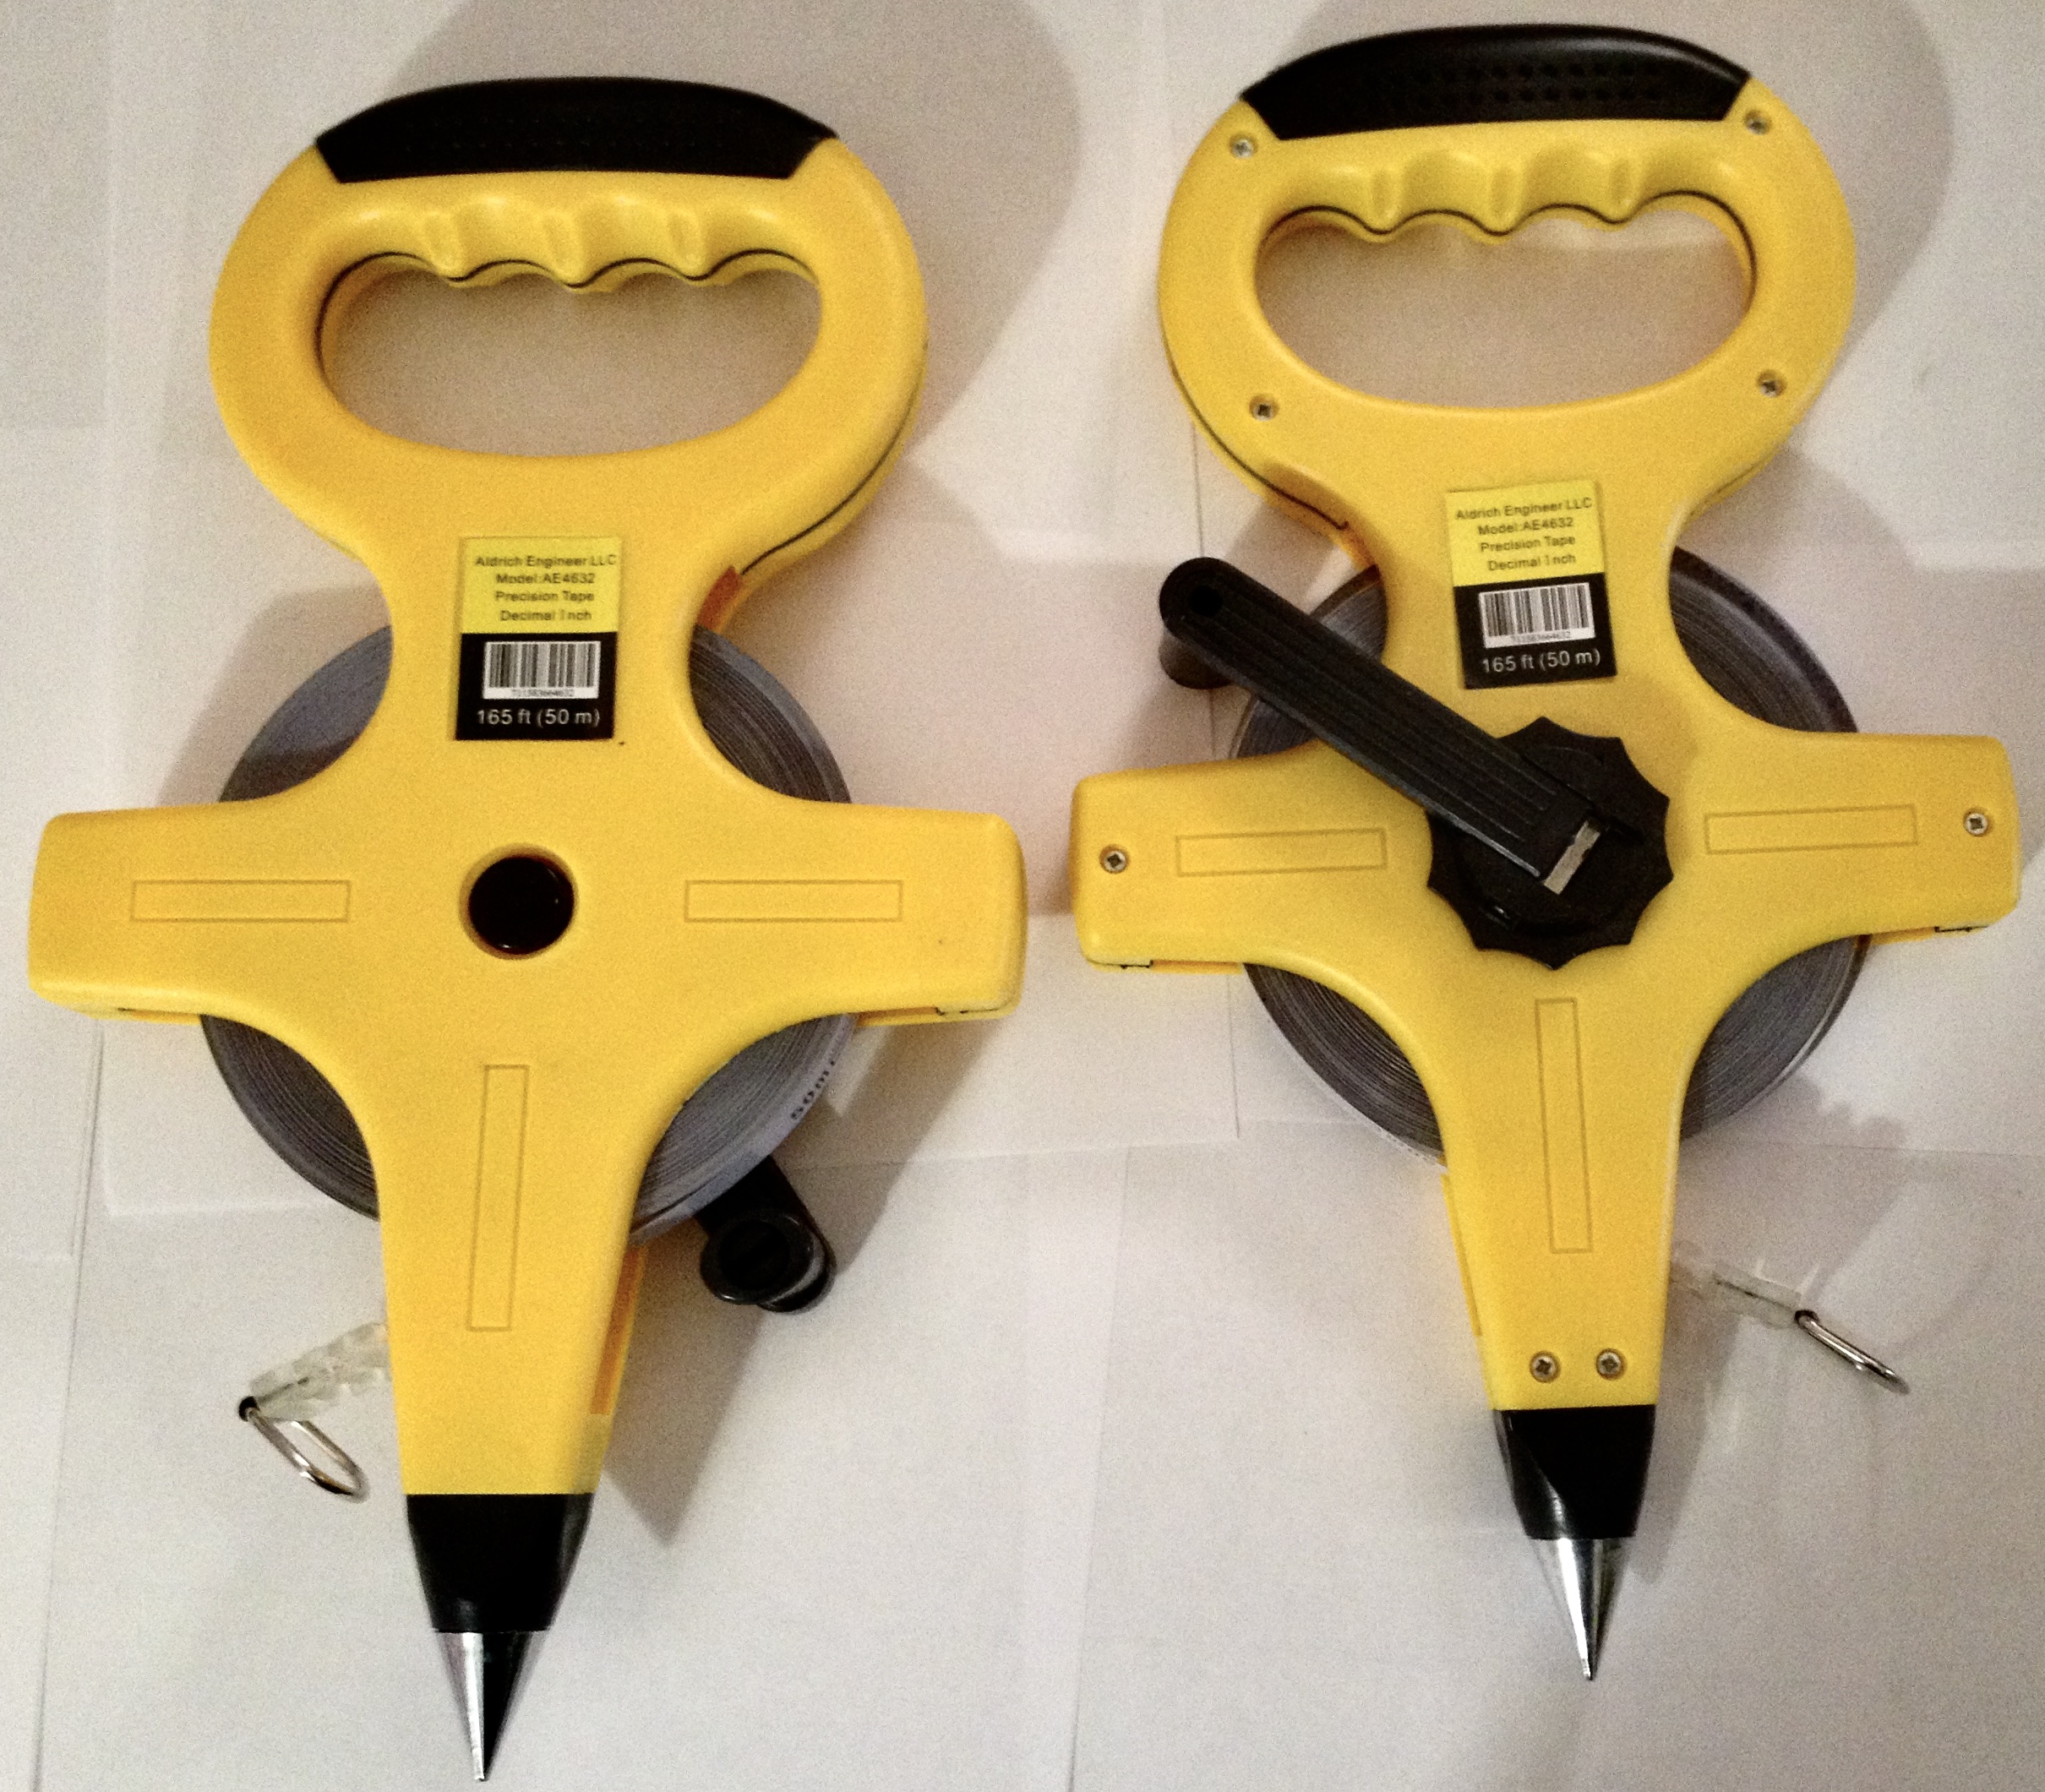 Front and back of 165 ft decimal inch tape measure